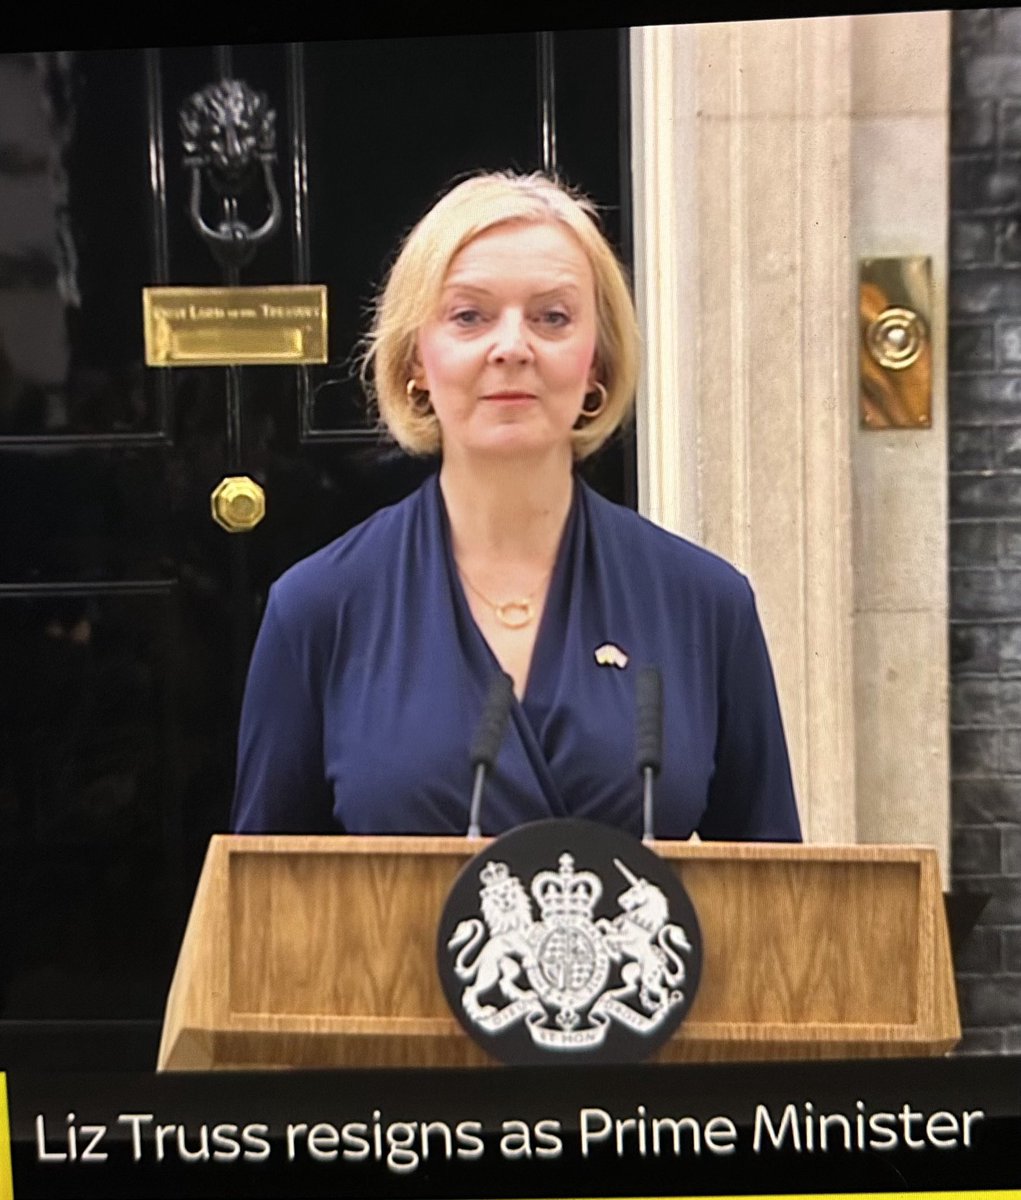 UK PM, Liz Truss resigns after 45 days in office Liz said in her resignation statement: “I cannot deliver the mandate on which I was elected.” She took responsibility & didn’t blame Covid, Russia-Ukraine War, Political Opponents, Rating Agencies, Principalities or Bearded Youth